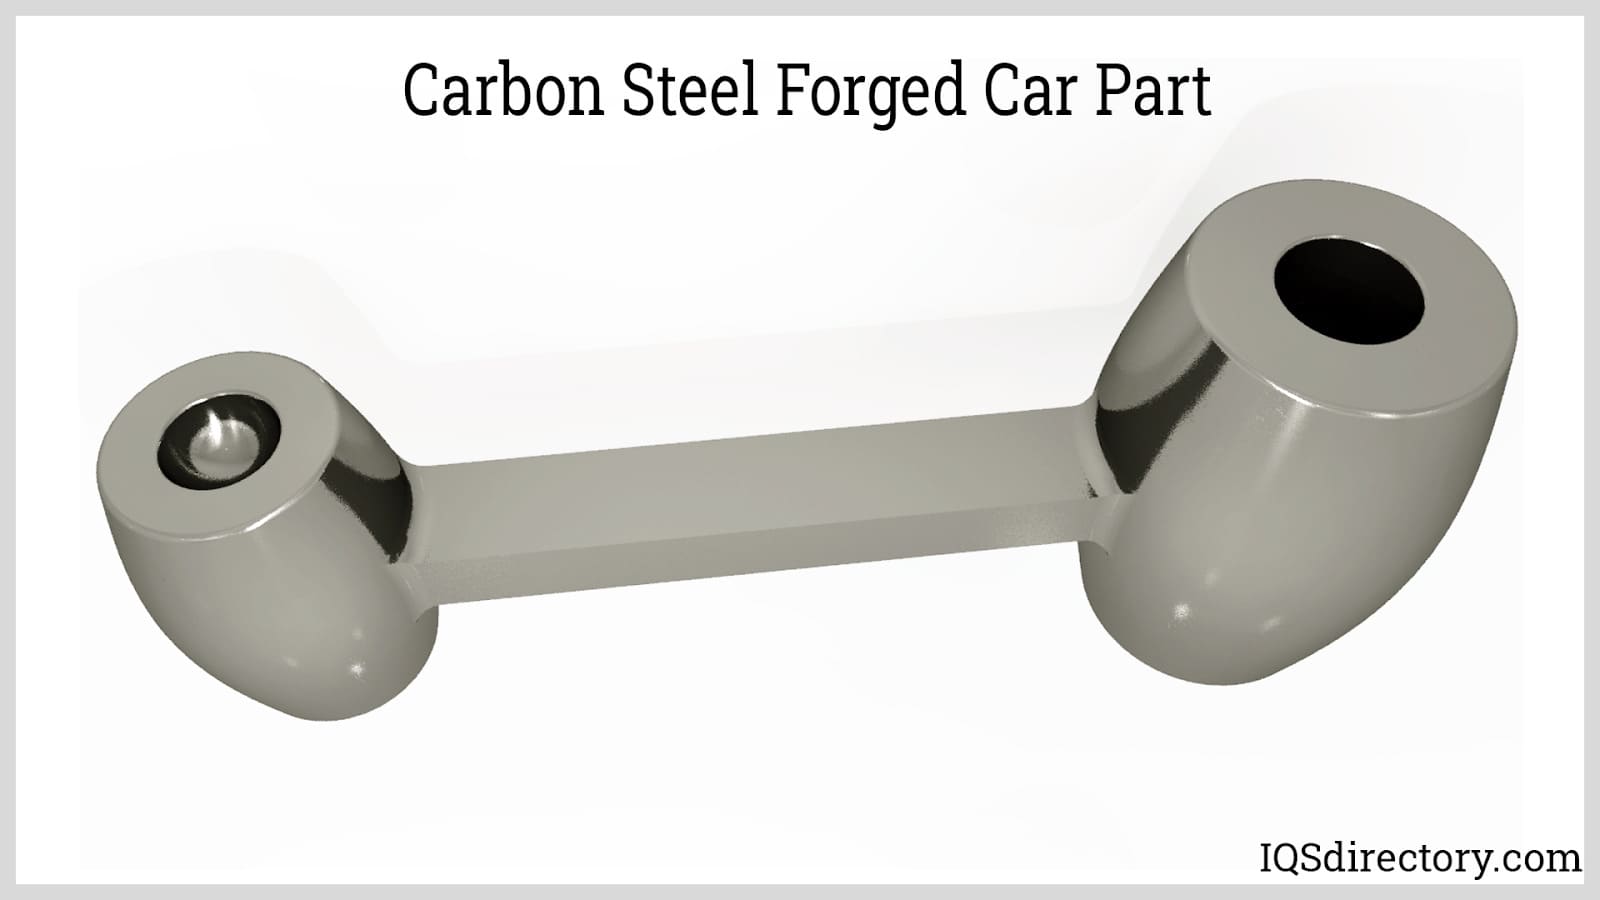 Carbon Steel Forged Car Part